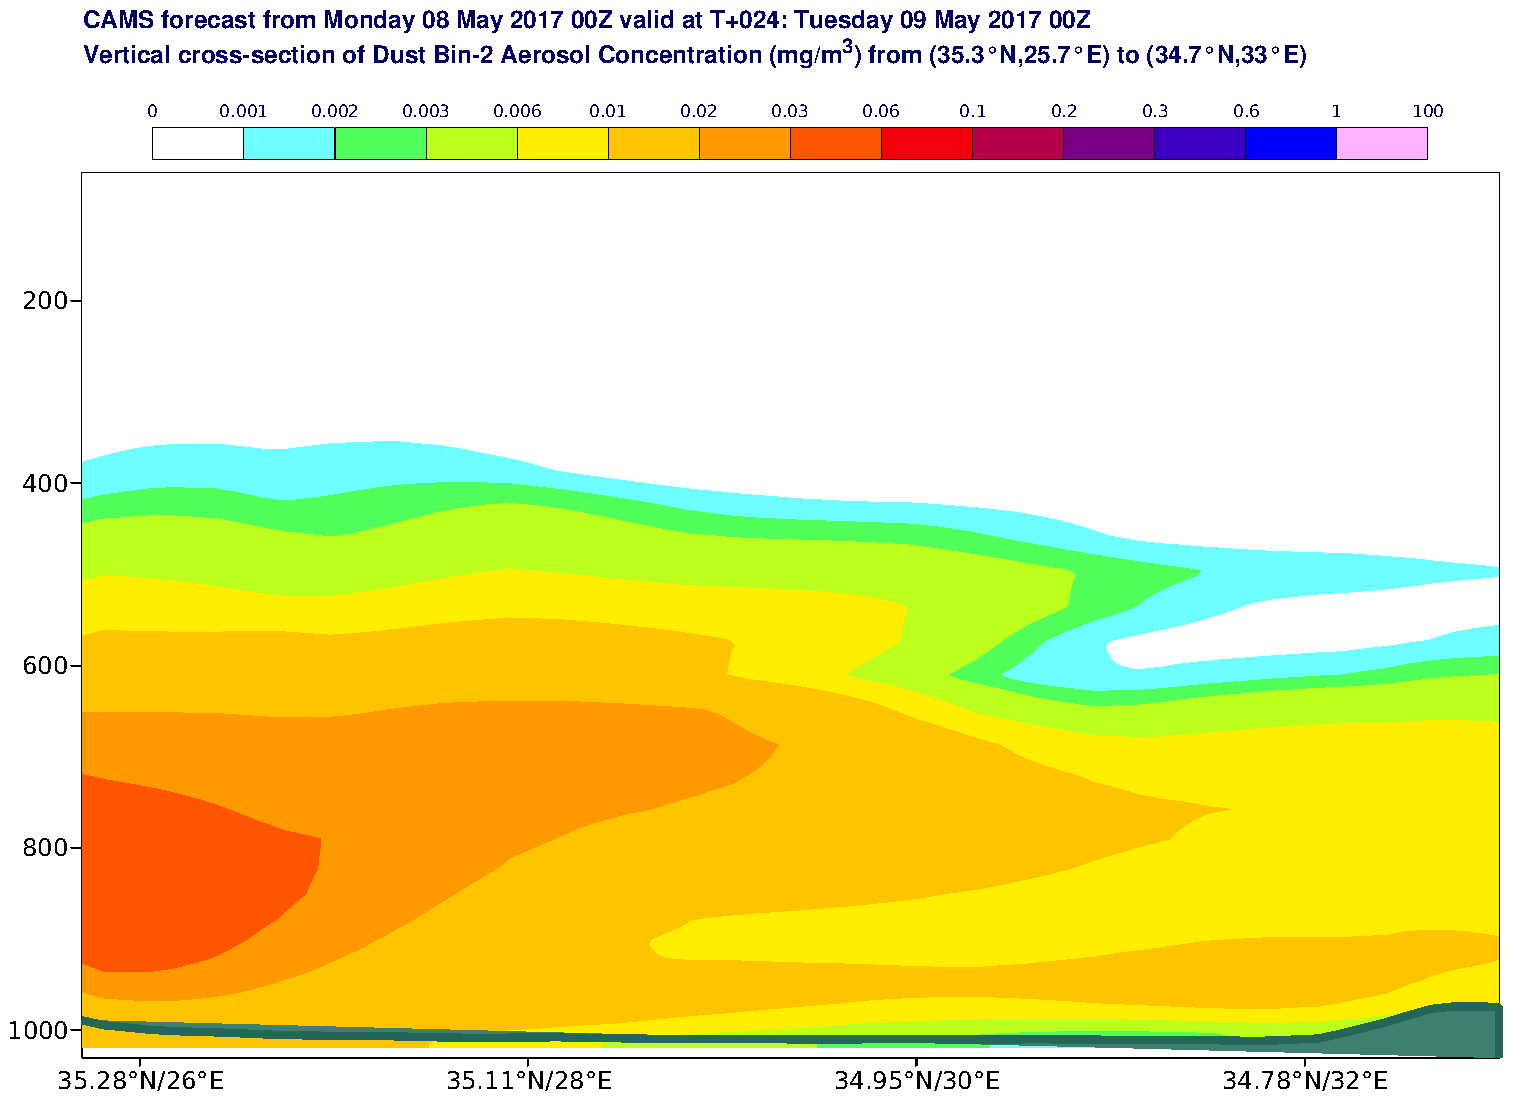 Vertical cross-section of Dust Bin-2 Aerosol Concentration (mg/m3) valid at T24 - 2017-05-09 00:00